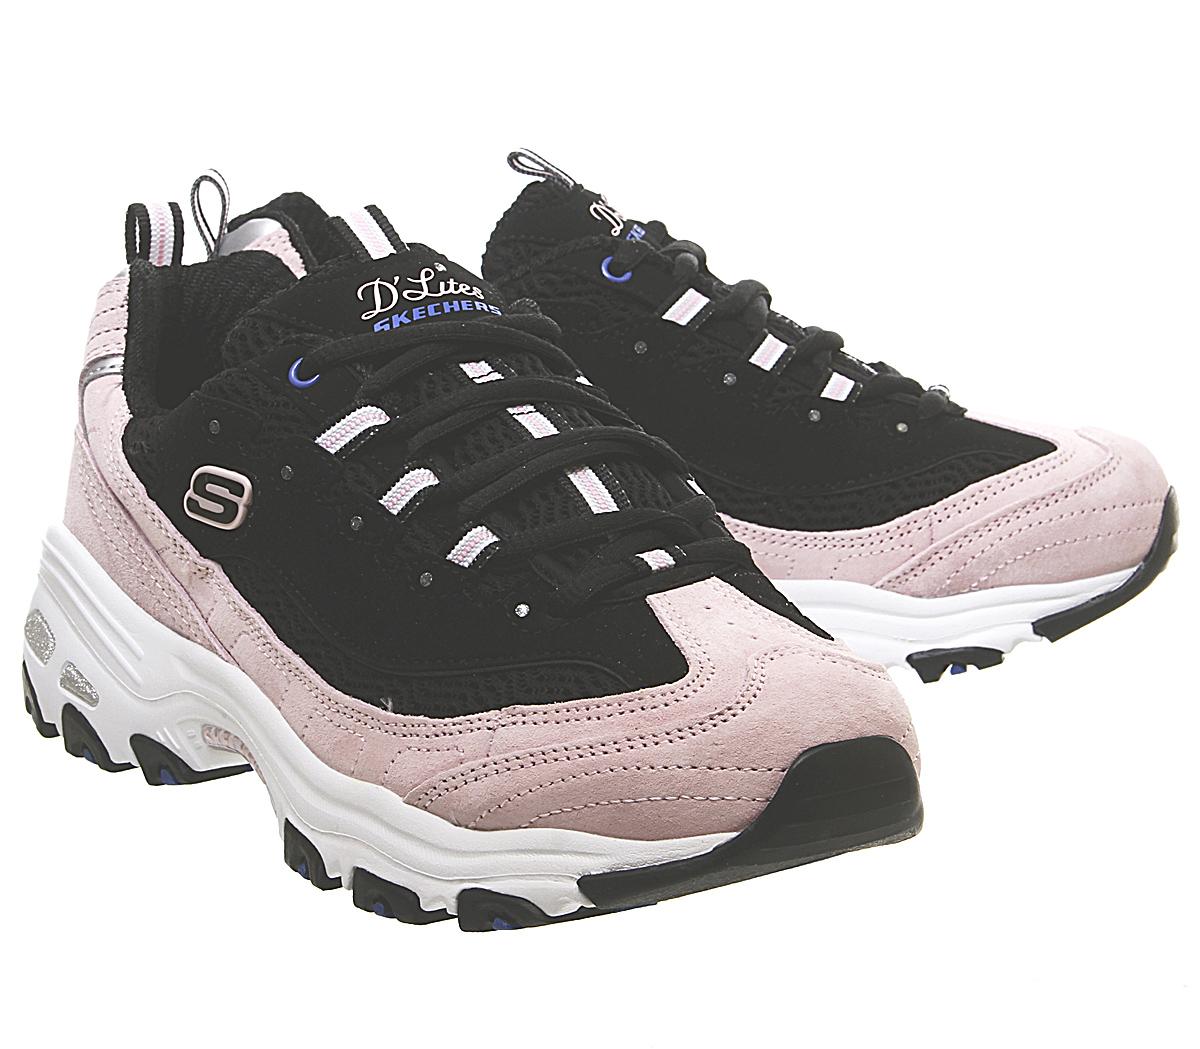 Skechers D'lites Trainers Black Pink - Hers trainers